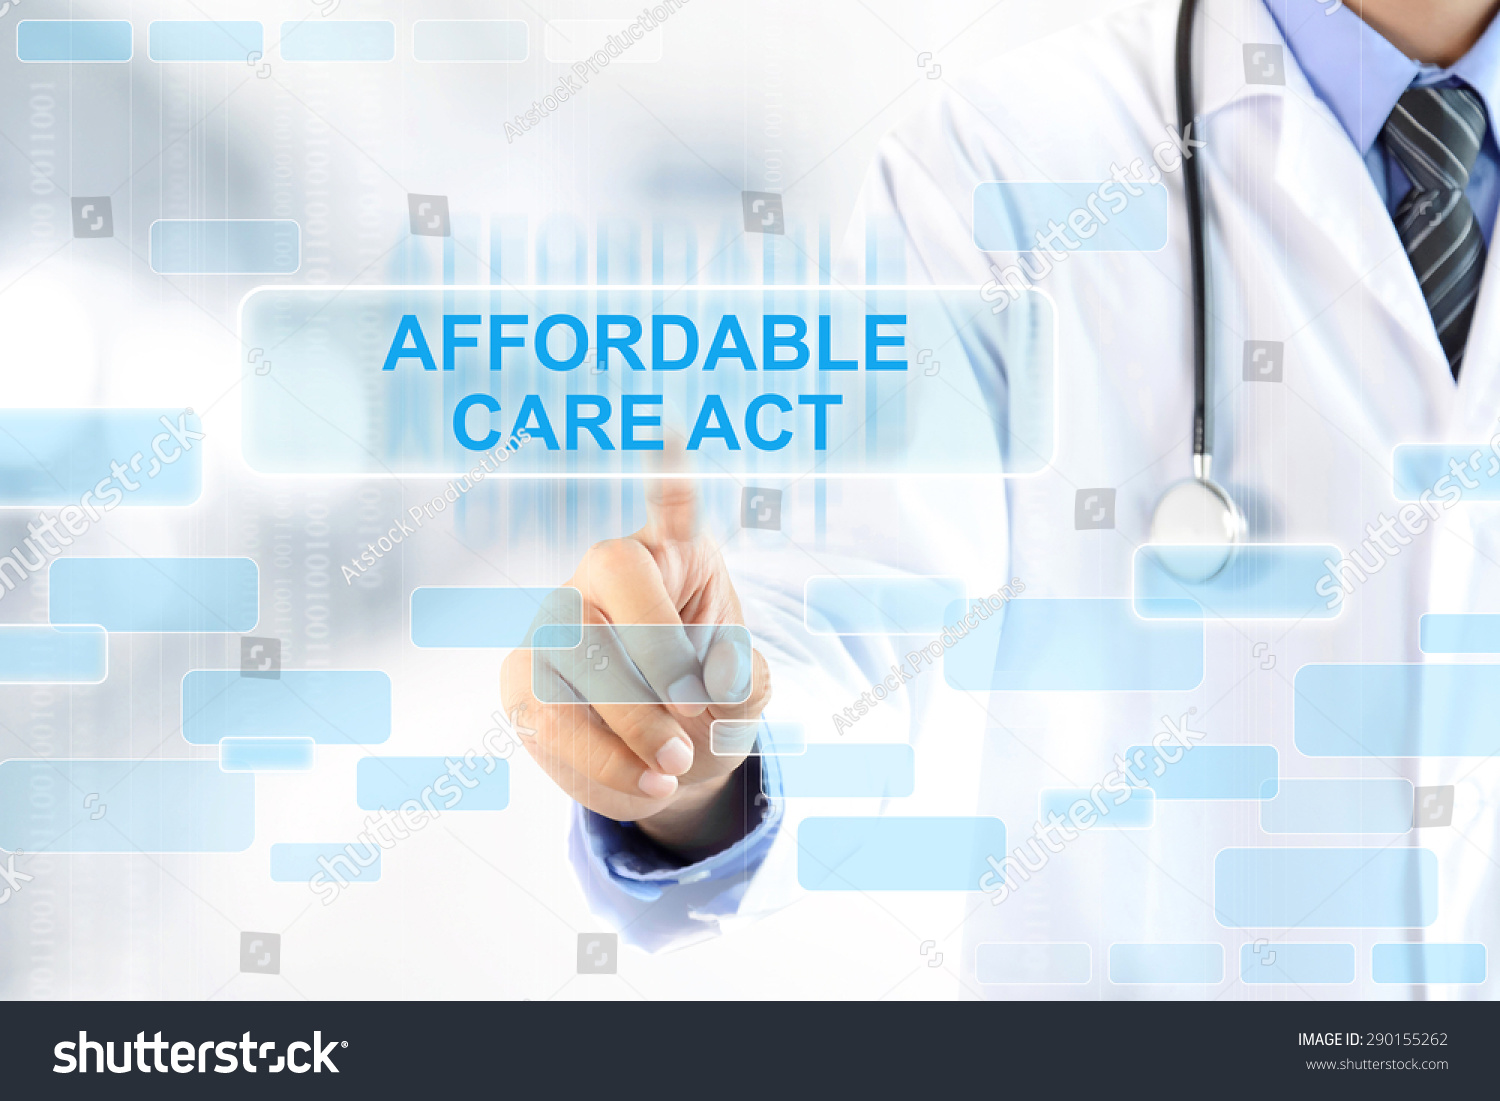 Doctor Hand Touching Affordable Care Act Stock Photo 290155262 - Shutterstock1500 x 1101